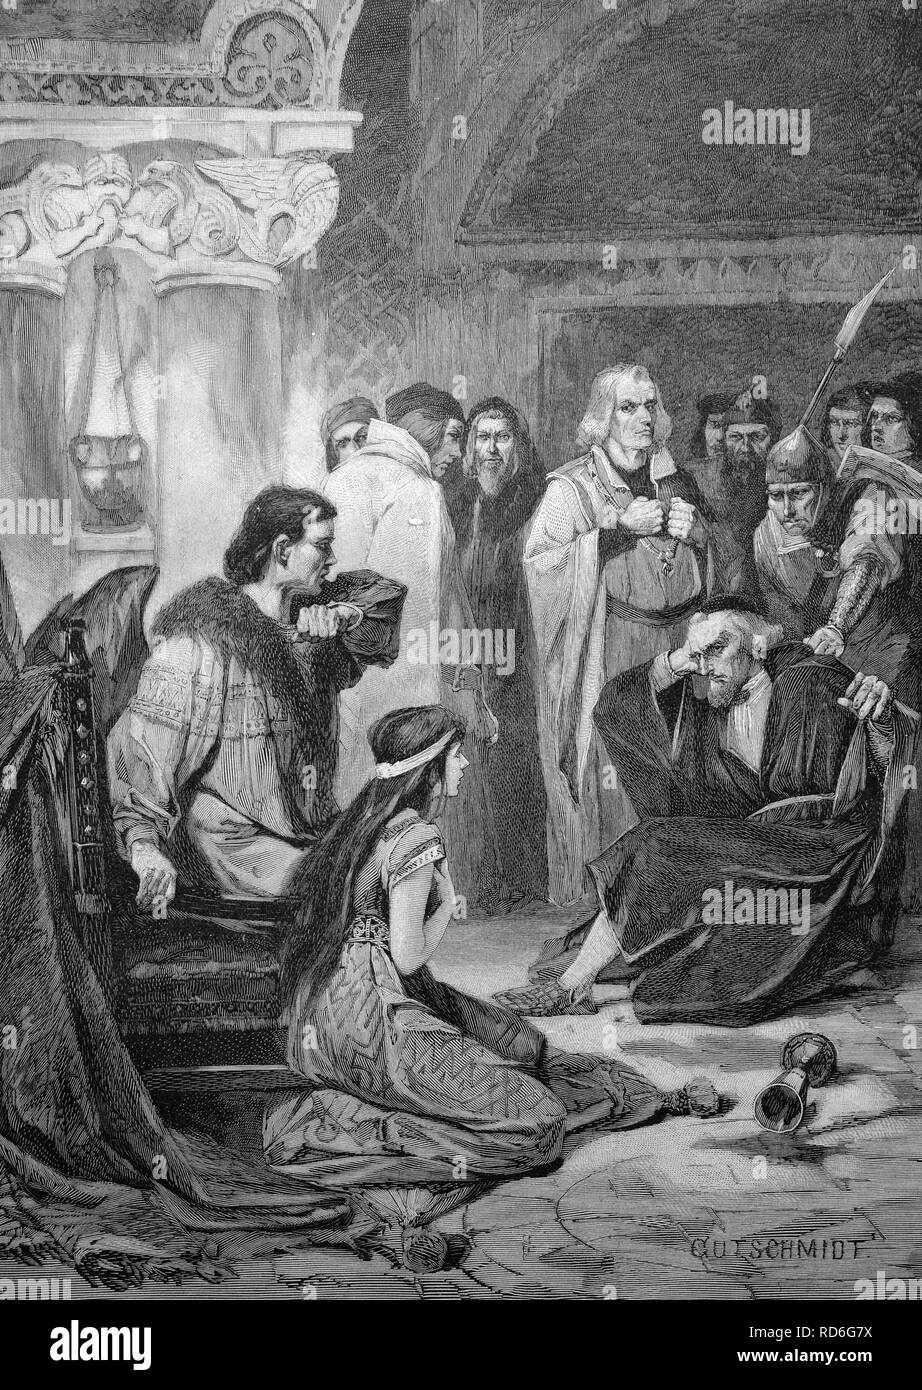 Emperor Frederick II forcing a doctor to drink from a goblet, historical illustration, ca. 1893 Stock Photo